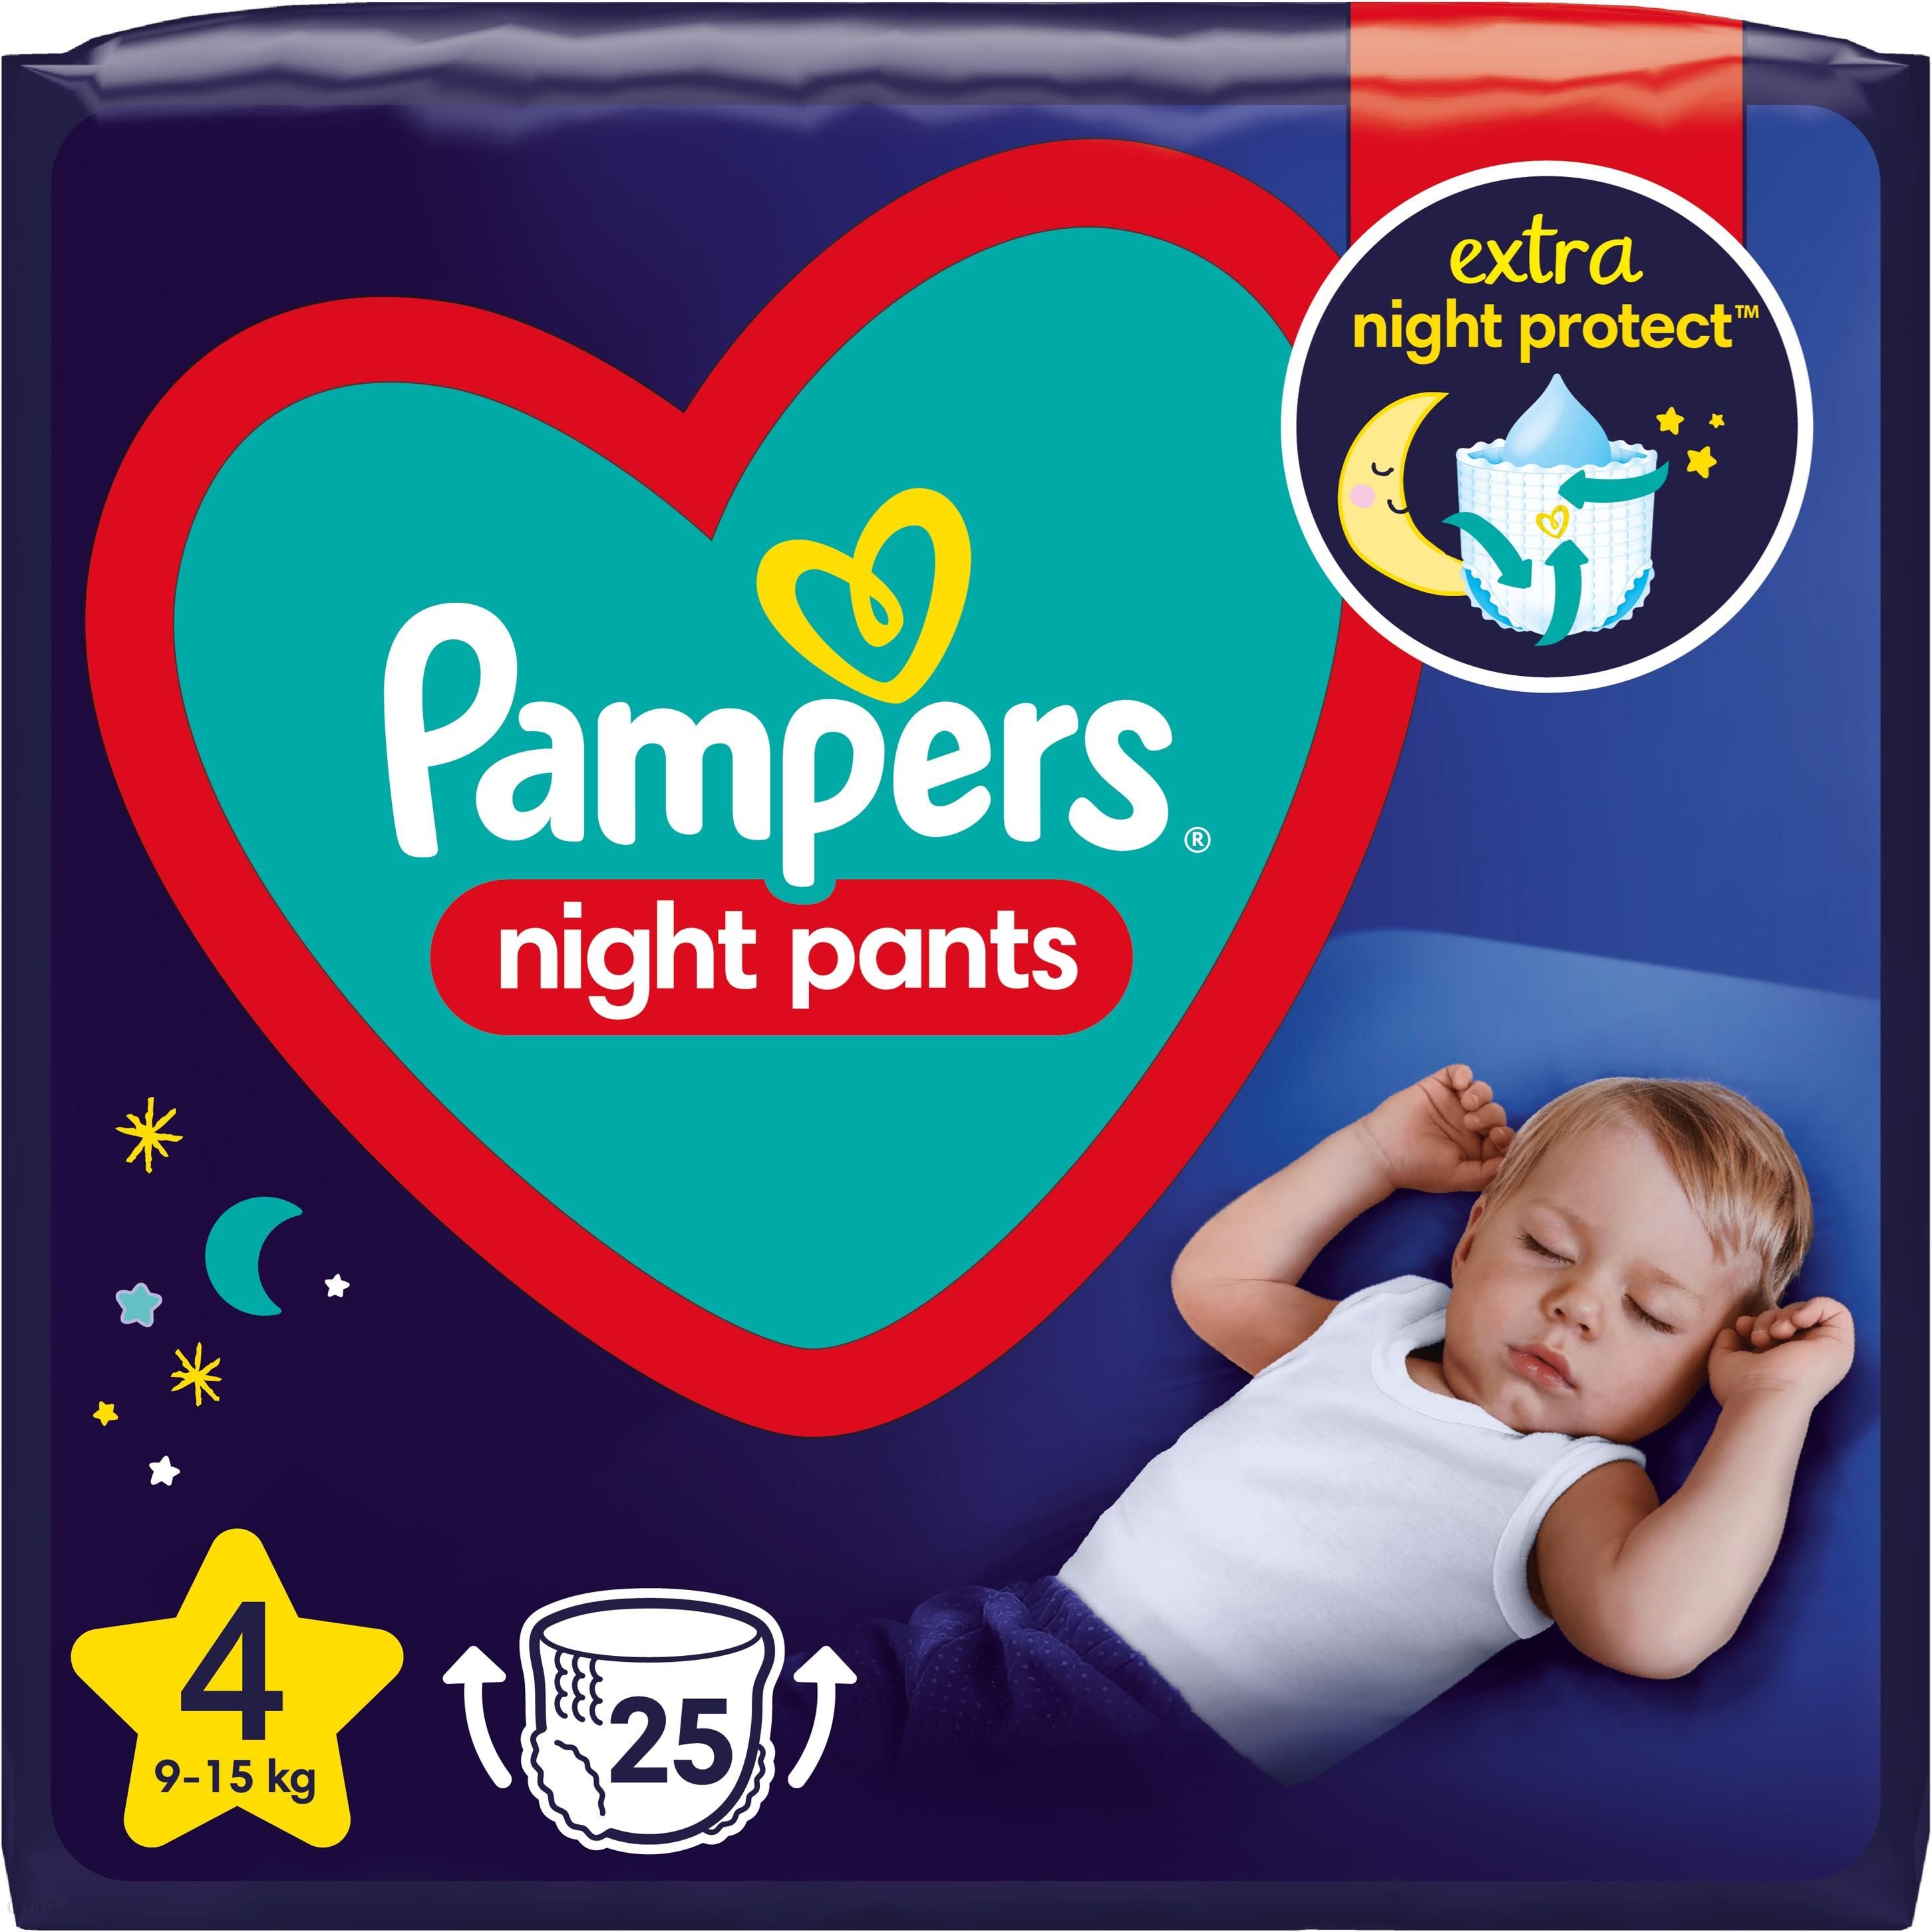 mfc j6920dw reset pampers